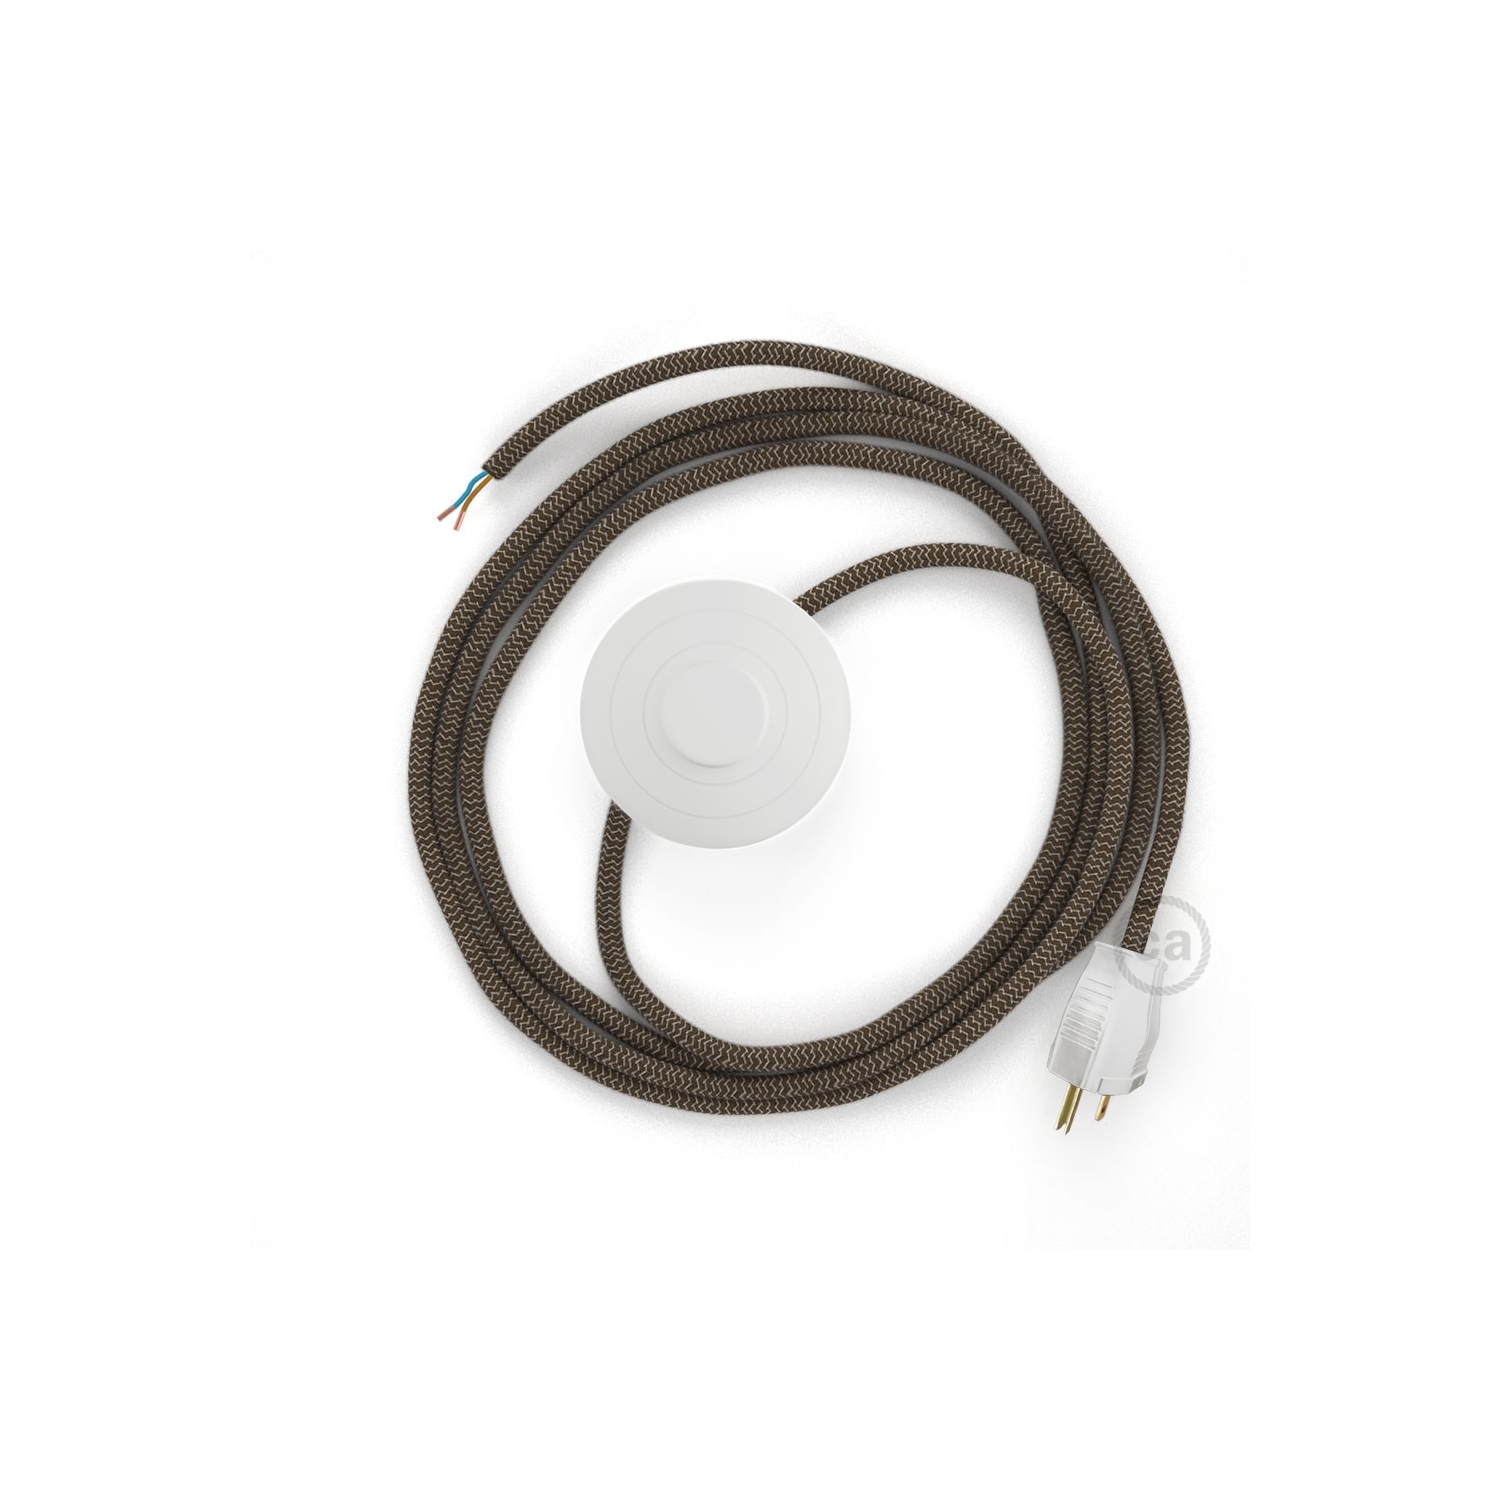 Power Cord with foot switch, RD73 Natural & Brown Linen Chevron - Choose color of switch/plug